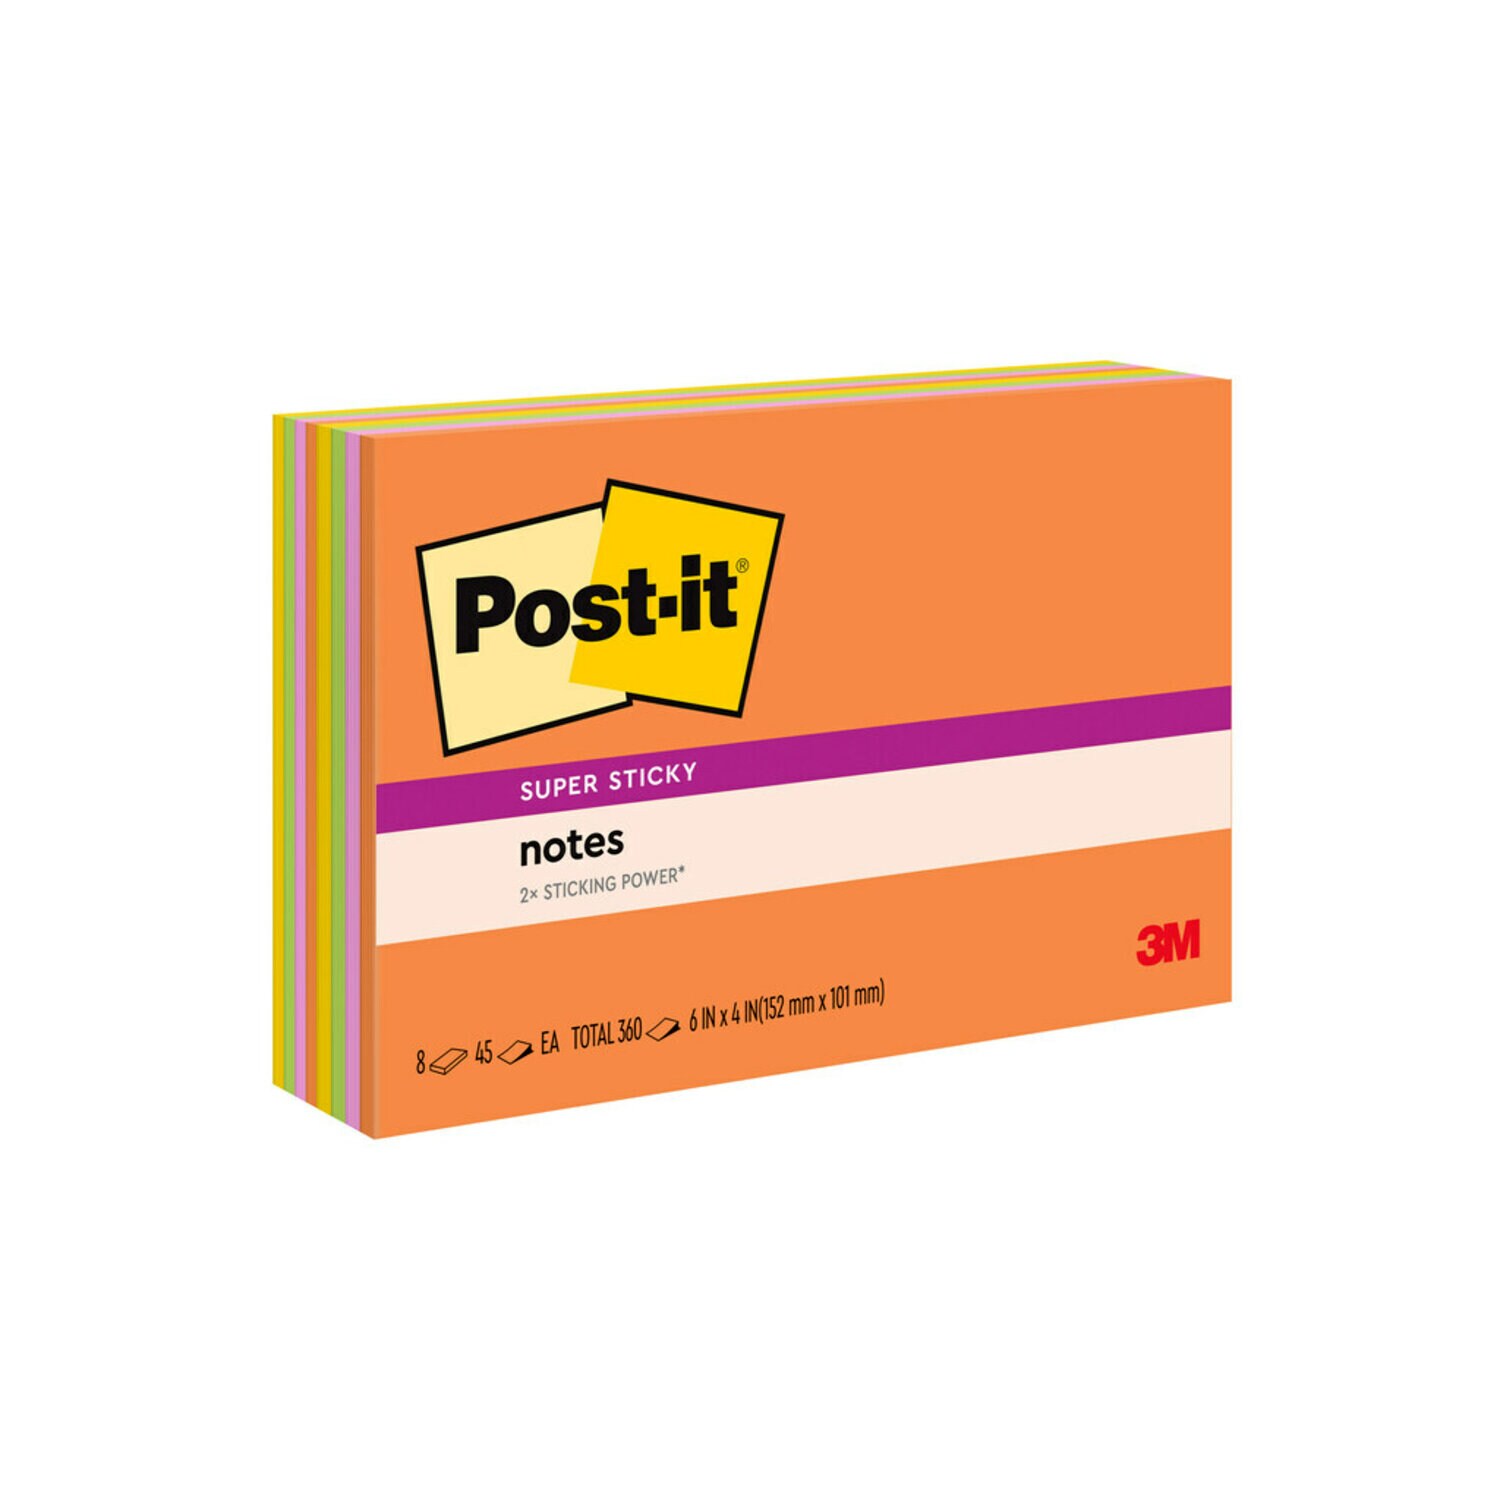 7100230035 - Post-it Super Sticky Notes 6445-SSP, 6 in x 4 in (152 mm x 101 mm), Energy Boost